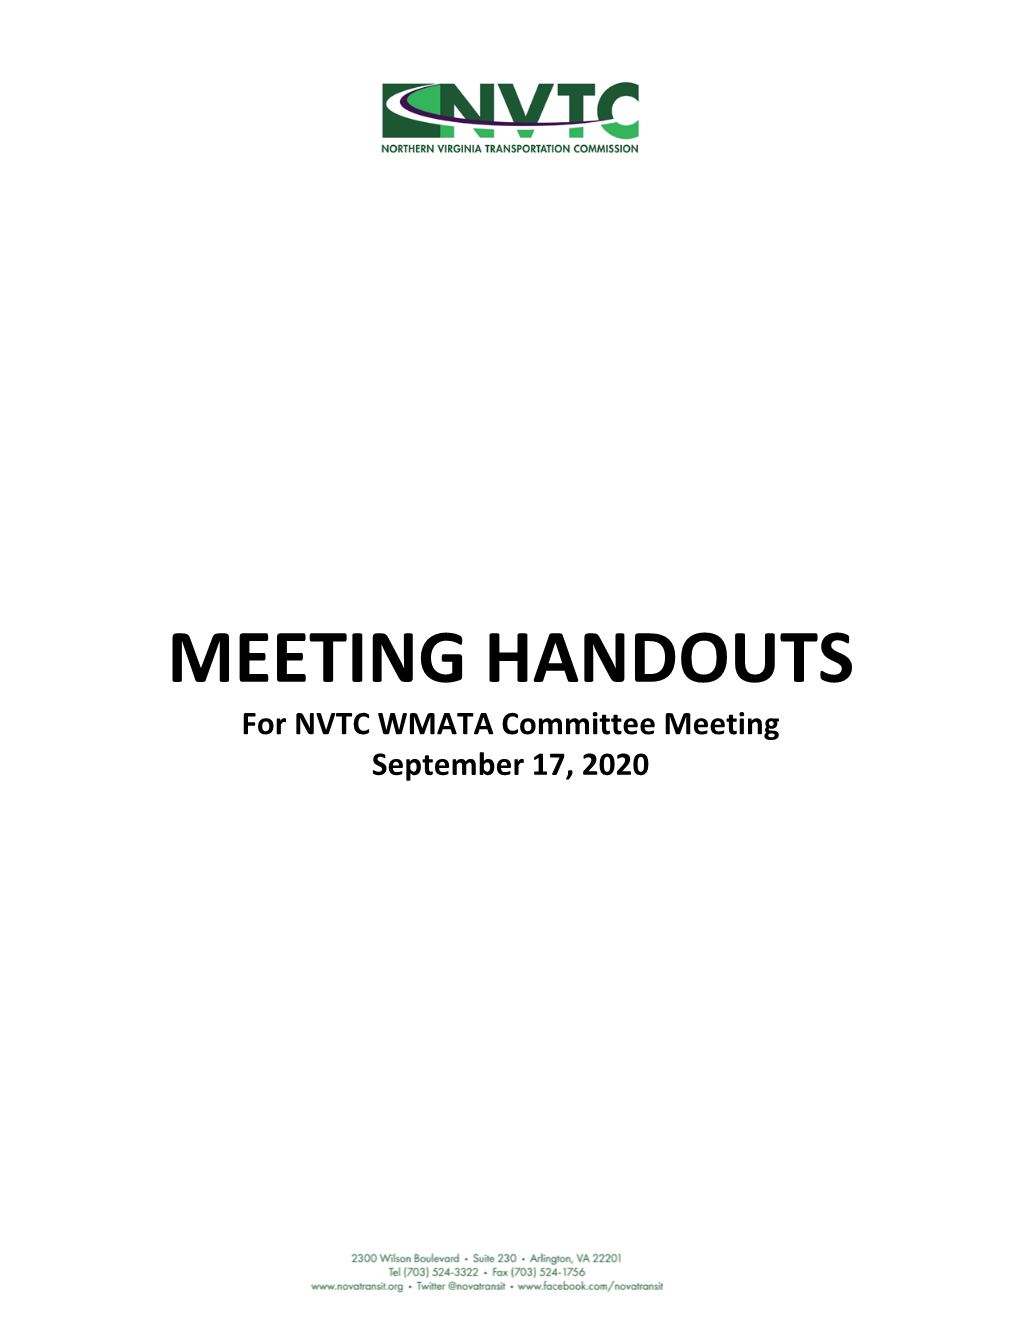 MEETING HANDOUTS for NVTC WMATA Committee Meeting September 17, 2020